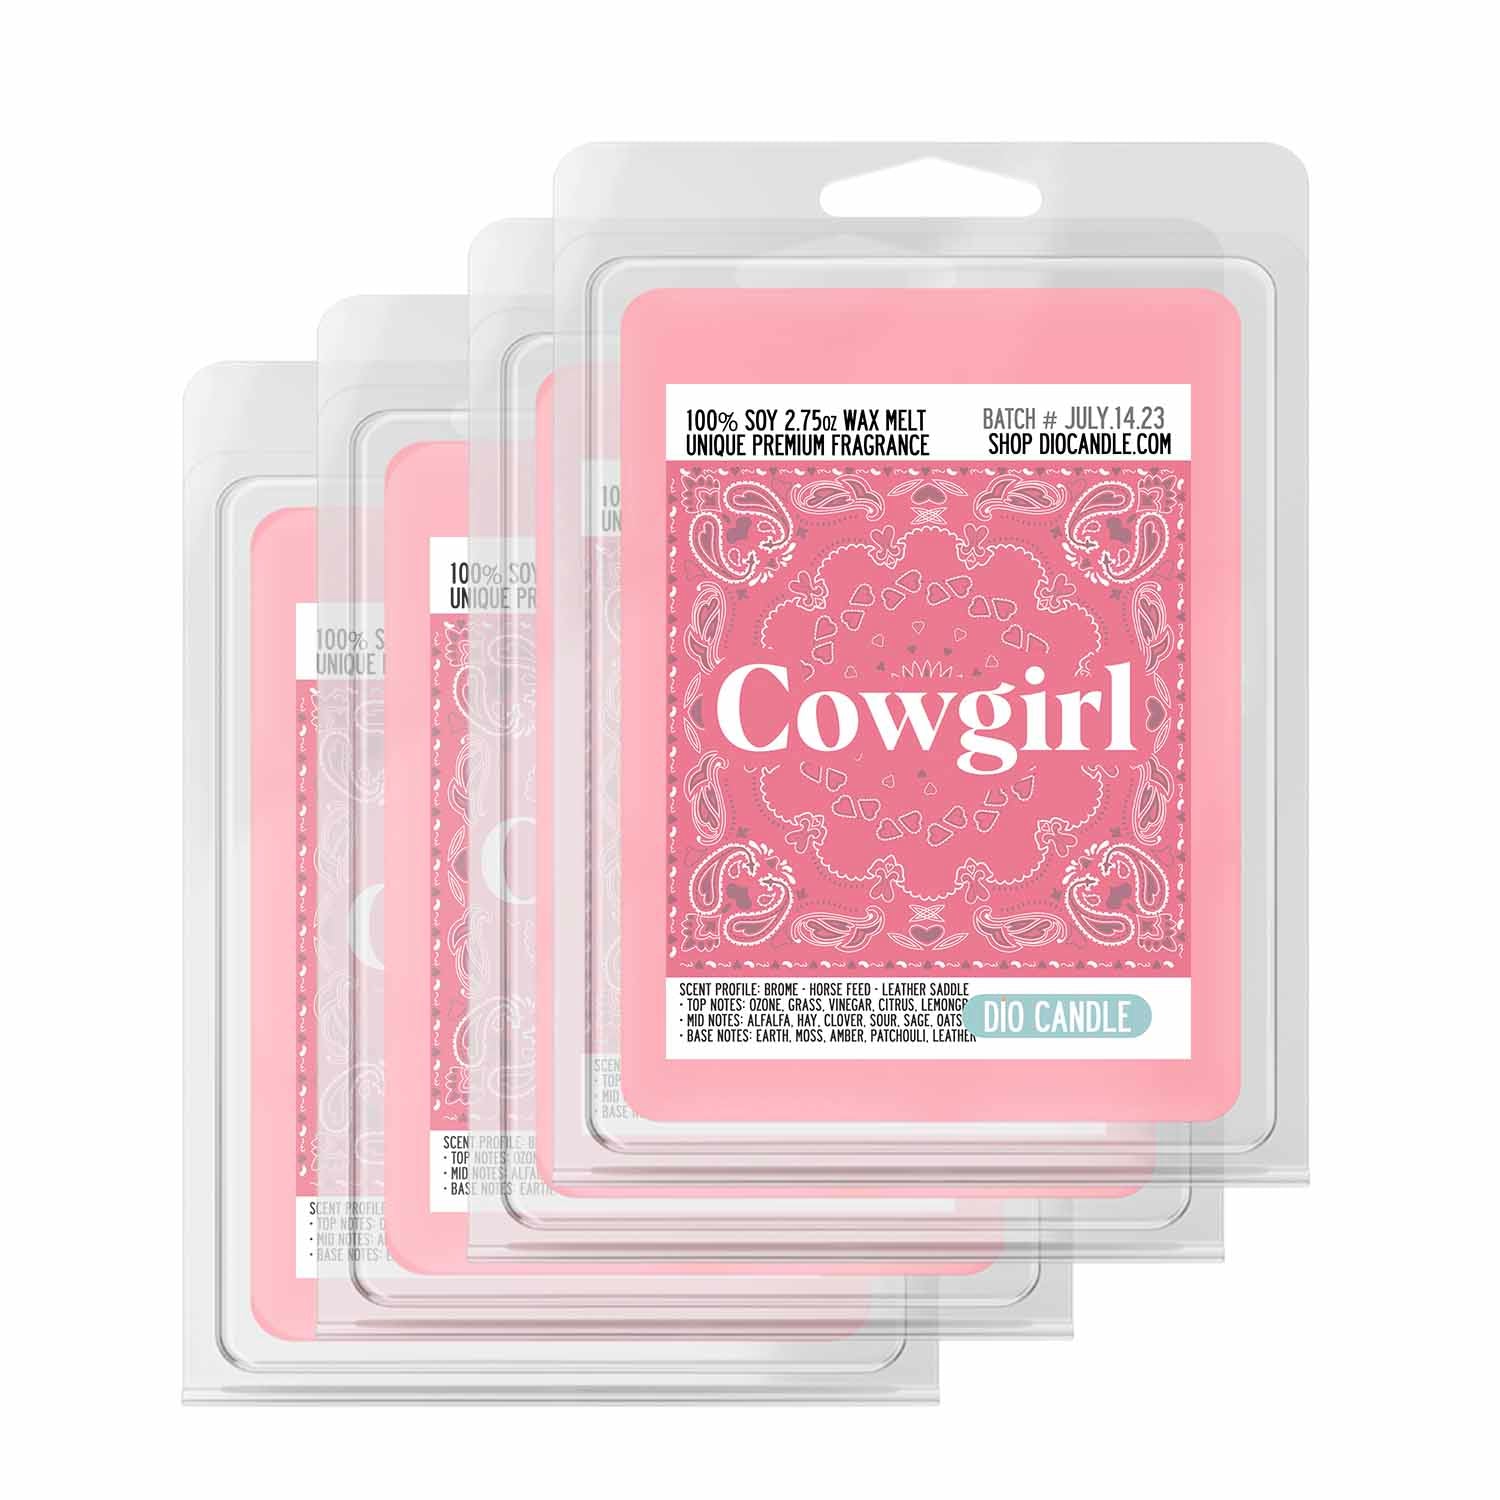 Cowgirl Candle